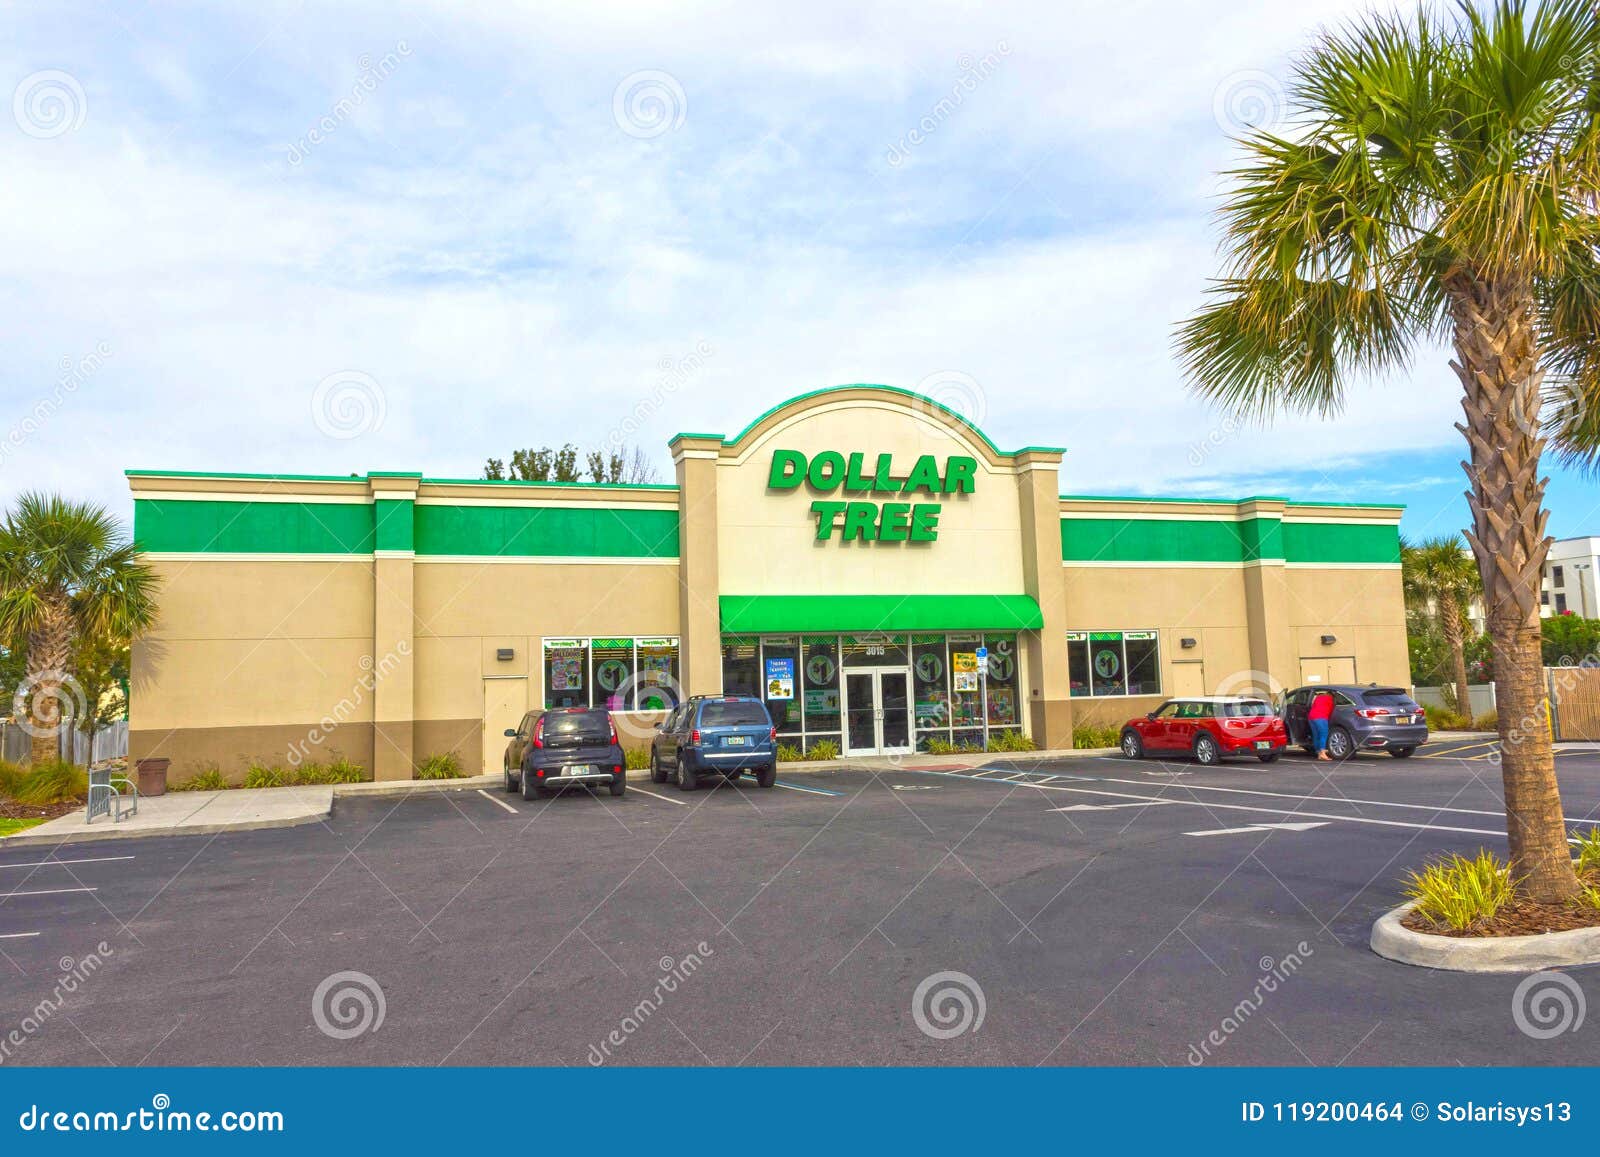 Orlando, USA - April 29, 2018: Exterior of Dollar Tree, Which is One of